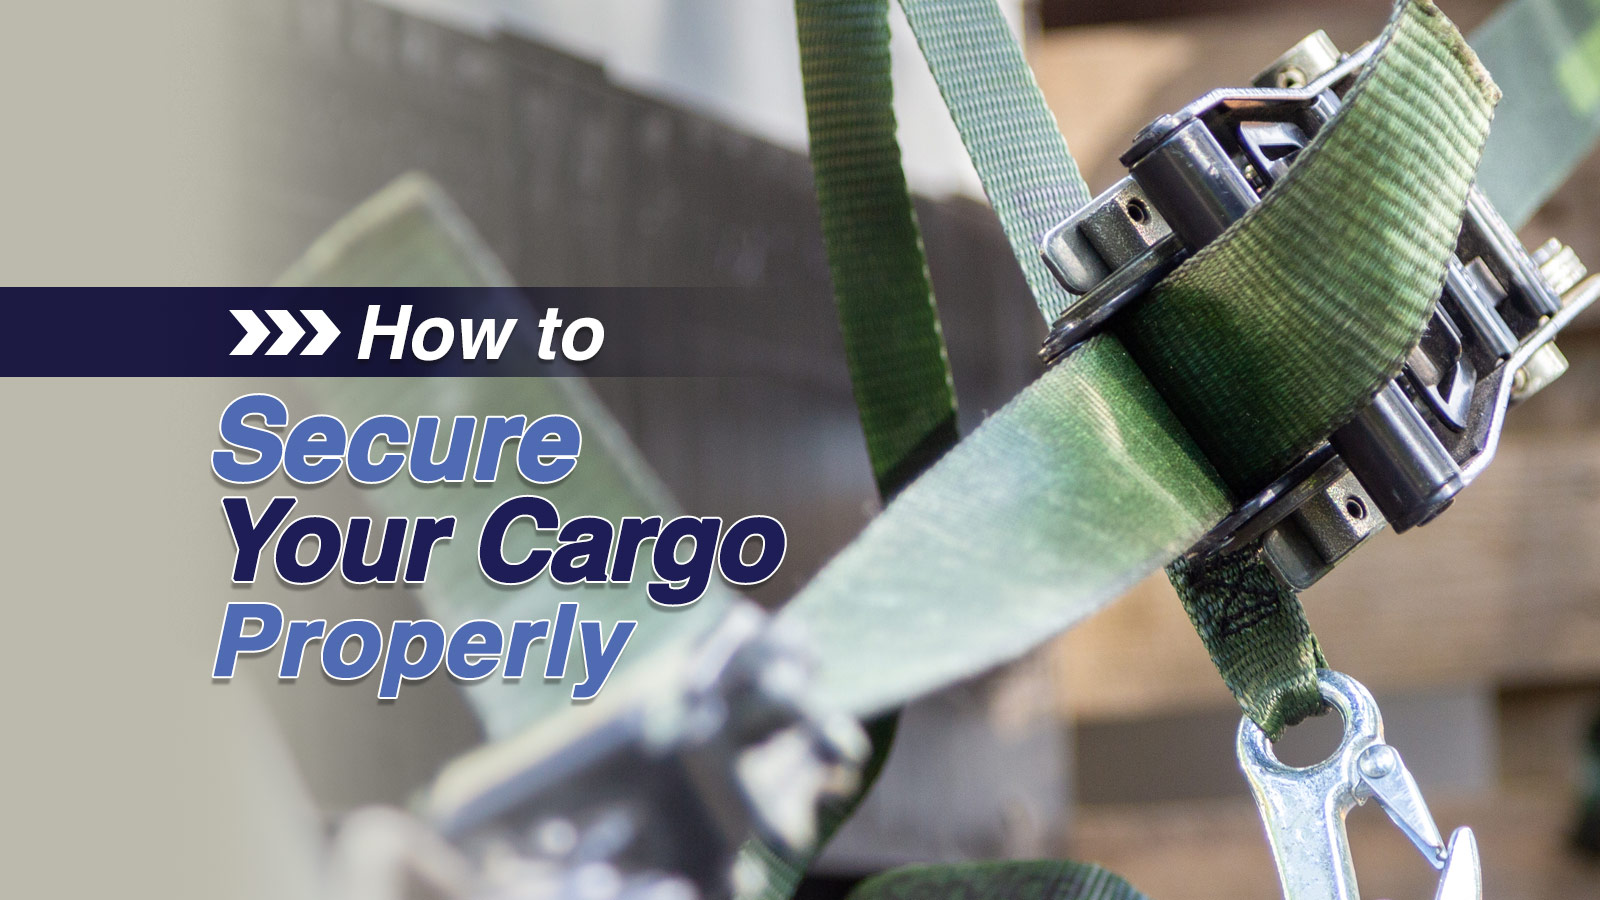 How to Secure Your Cargo Properly